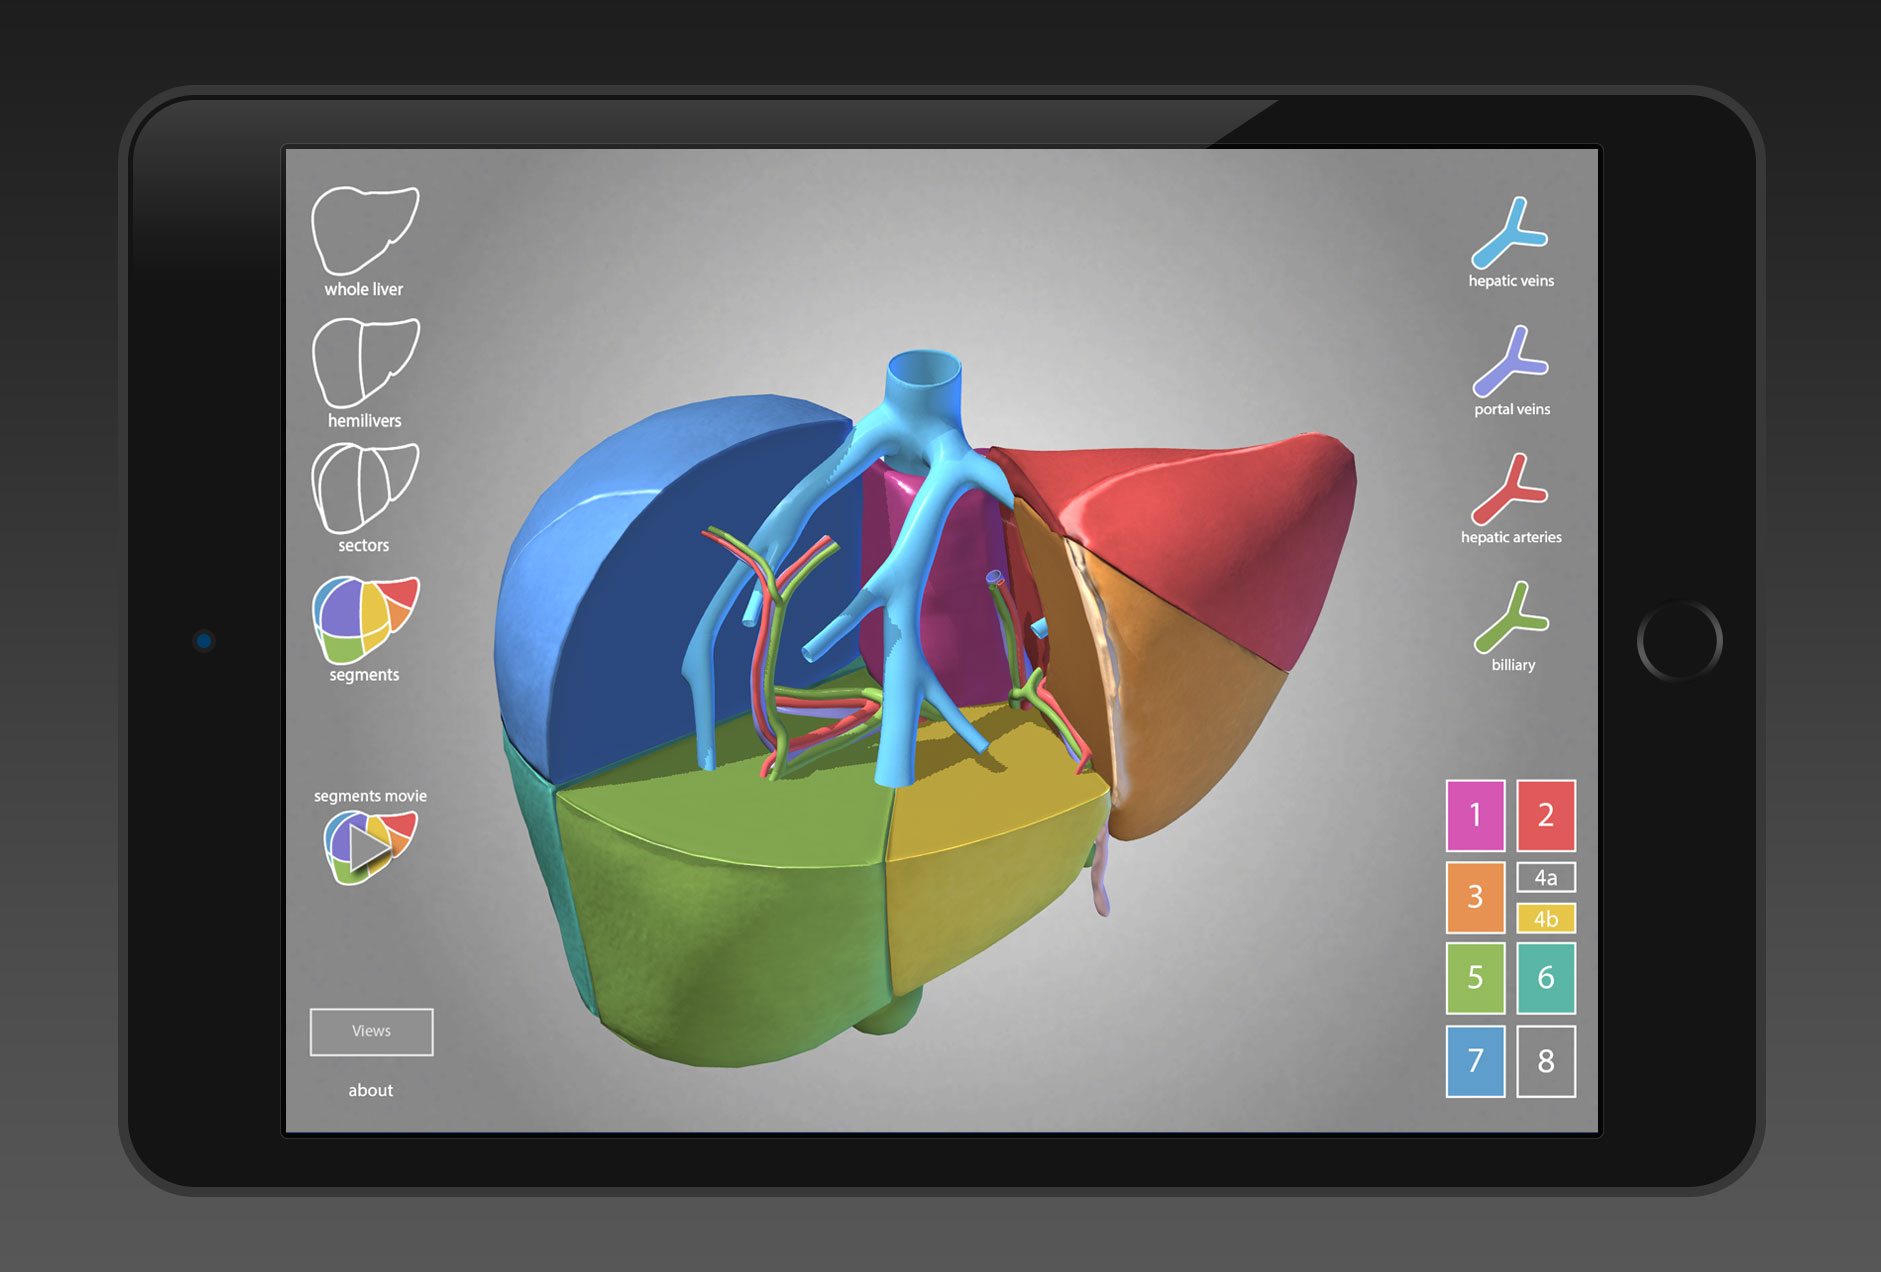 CSAT's Surgical Anatomy of the Liver app.